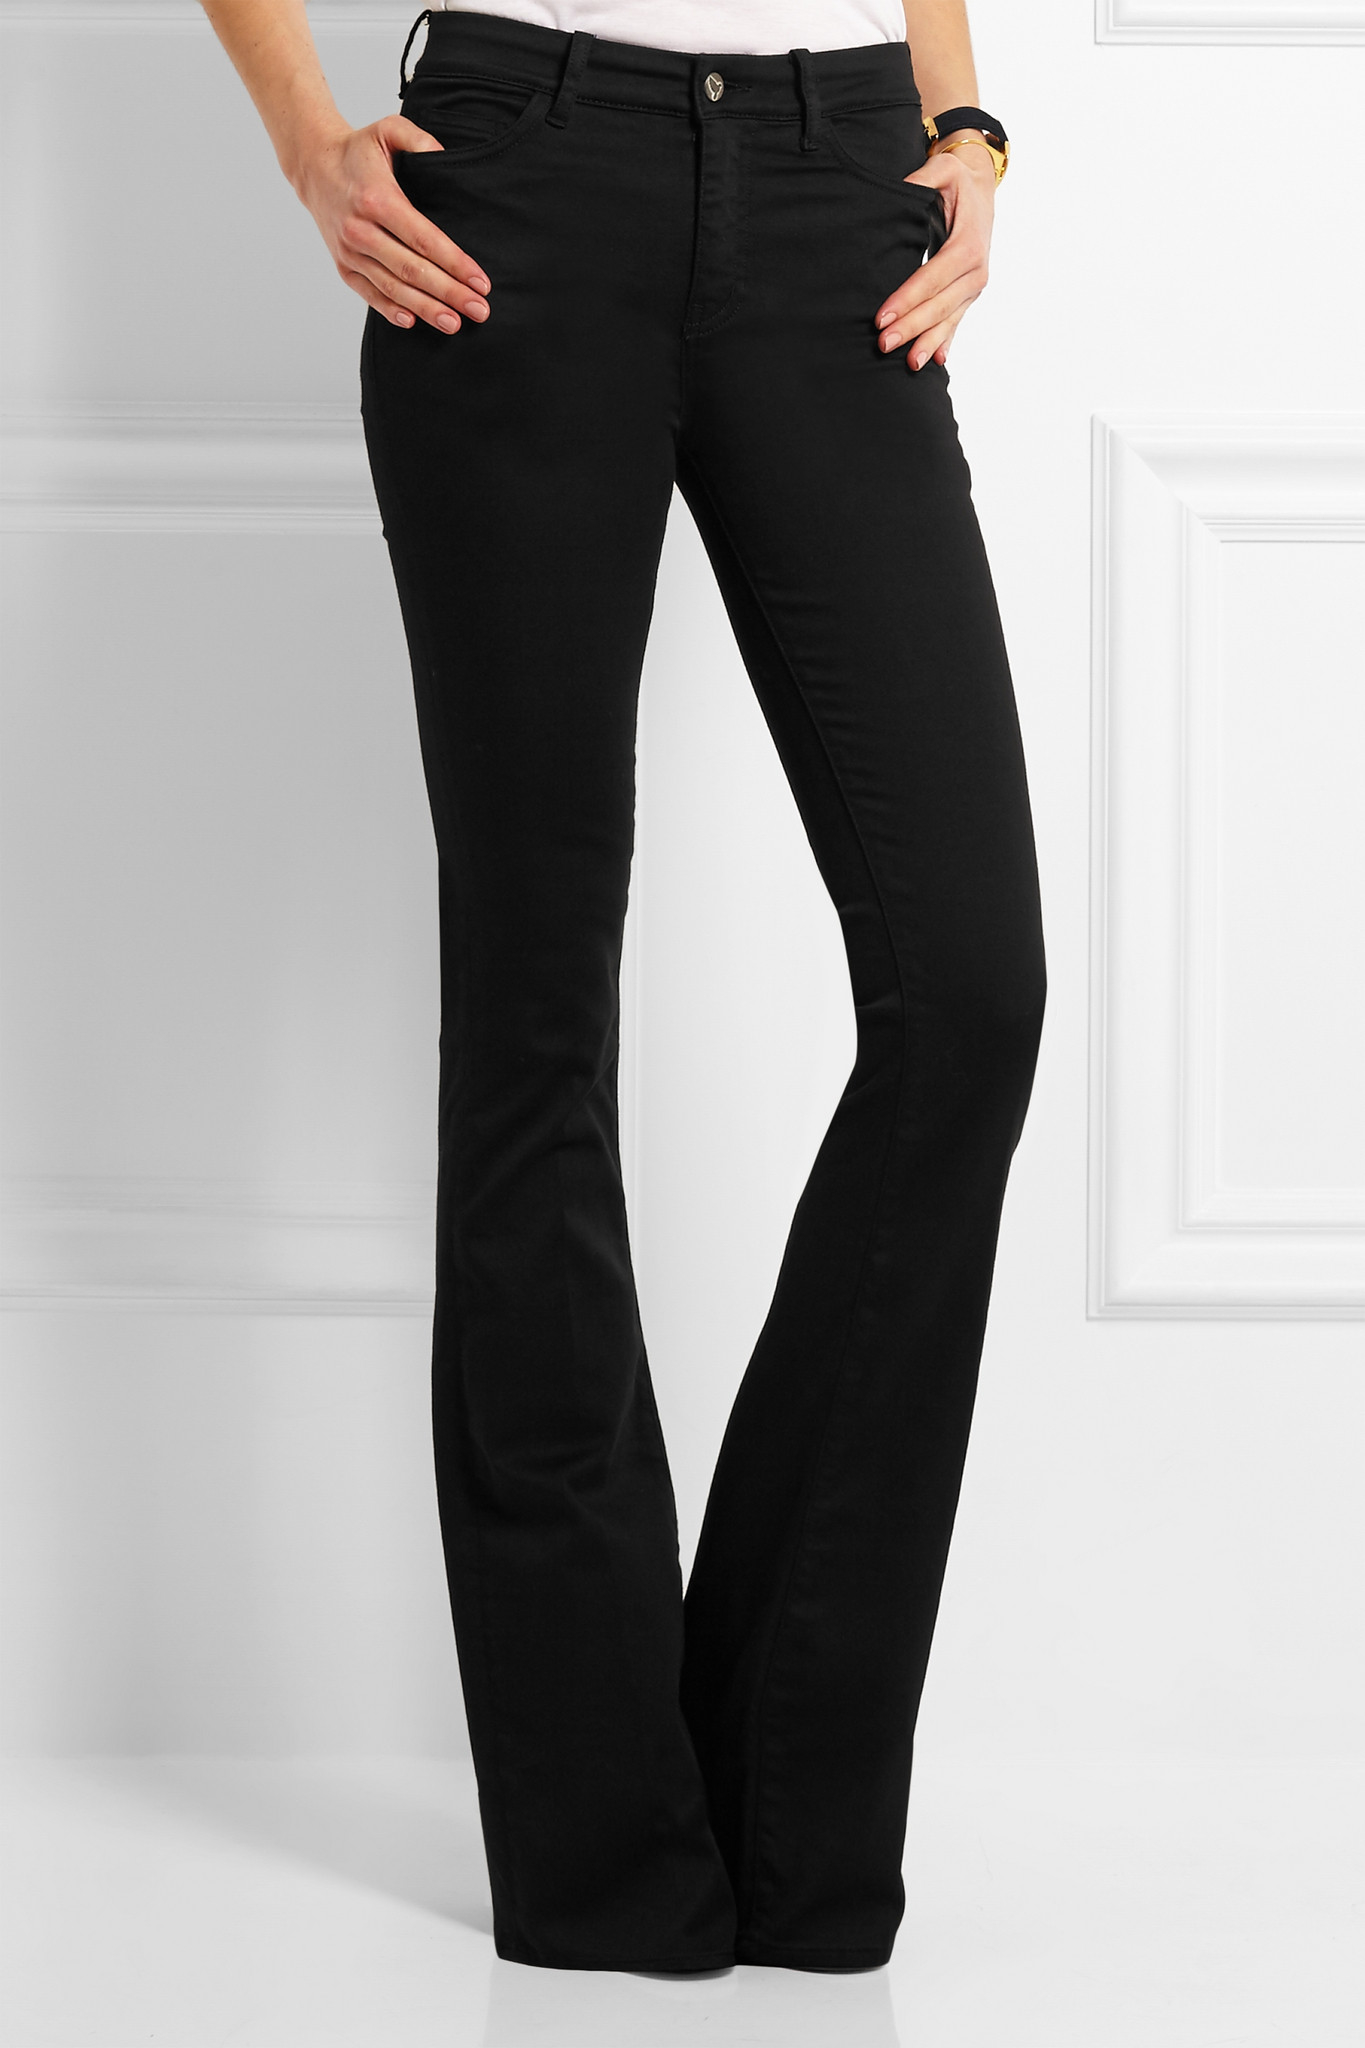 mih jeans marrakesh flare